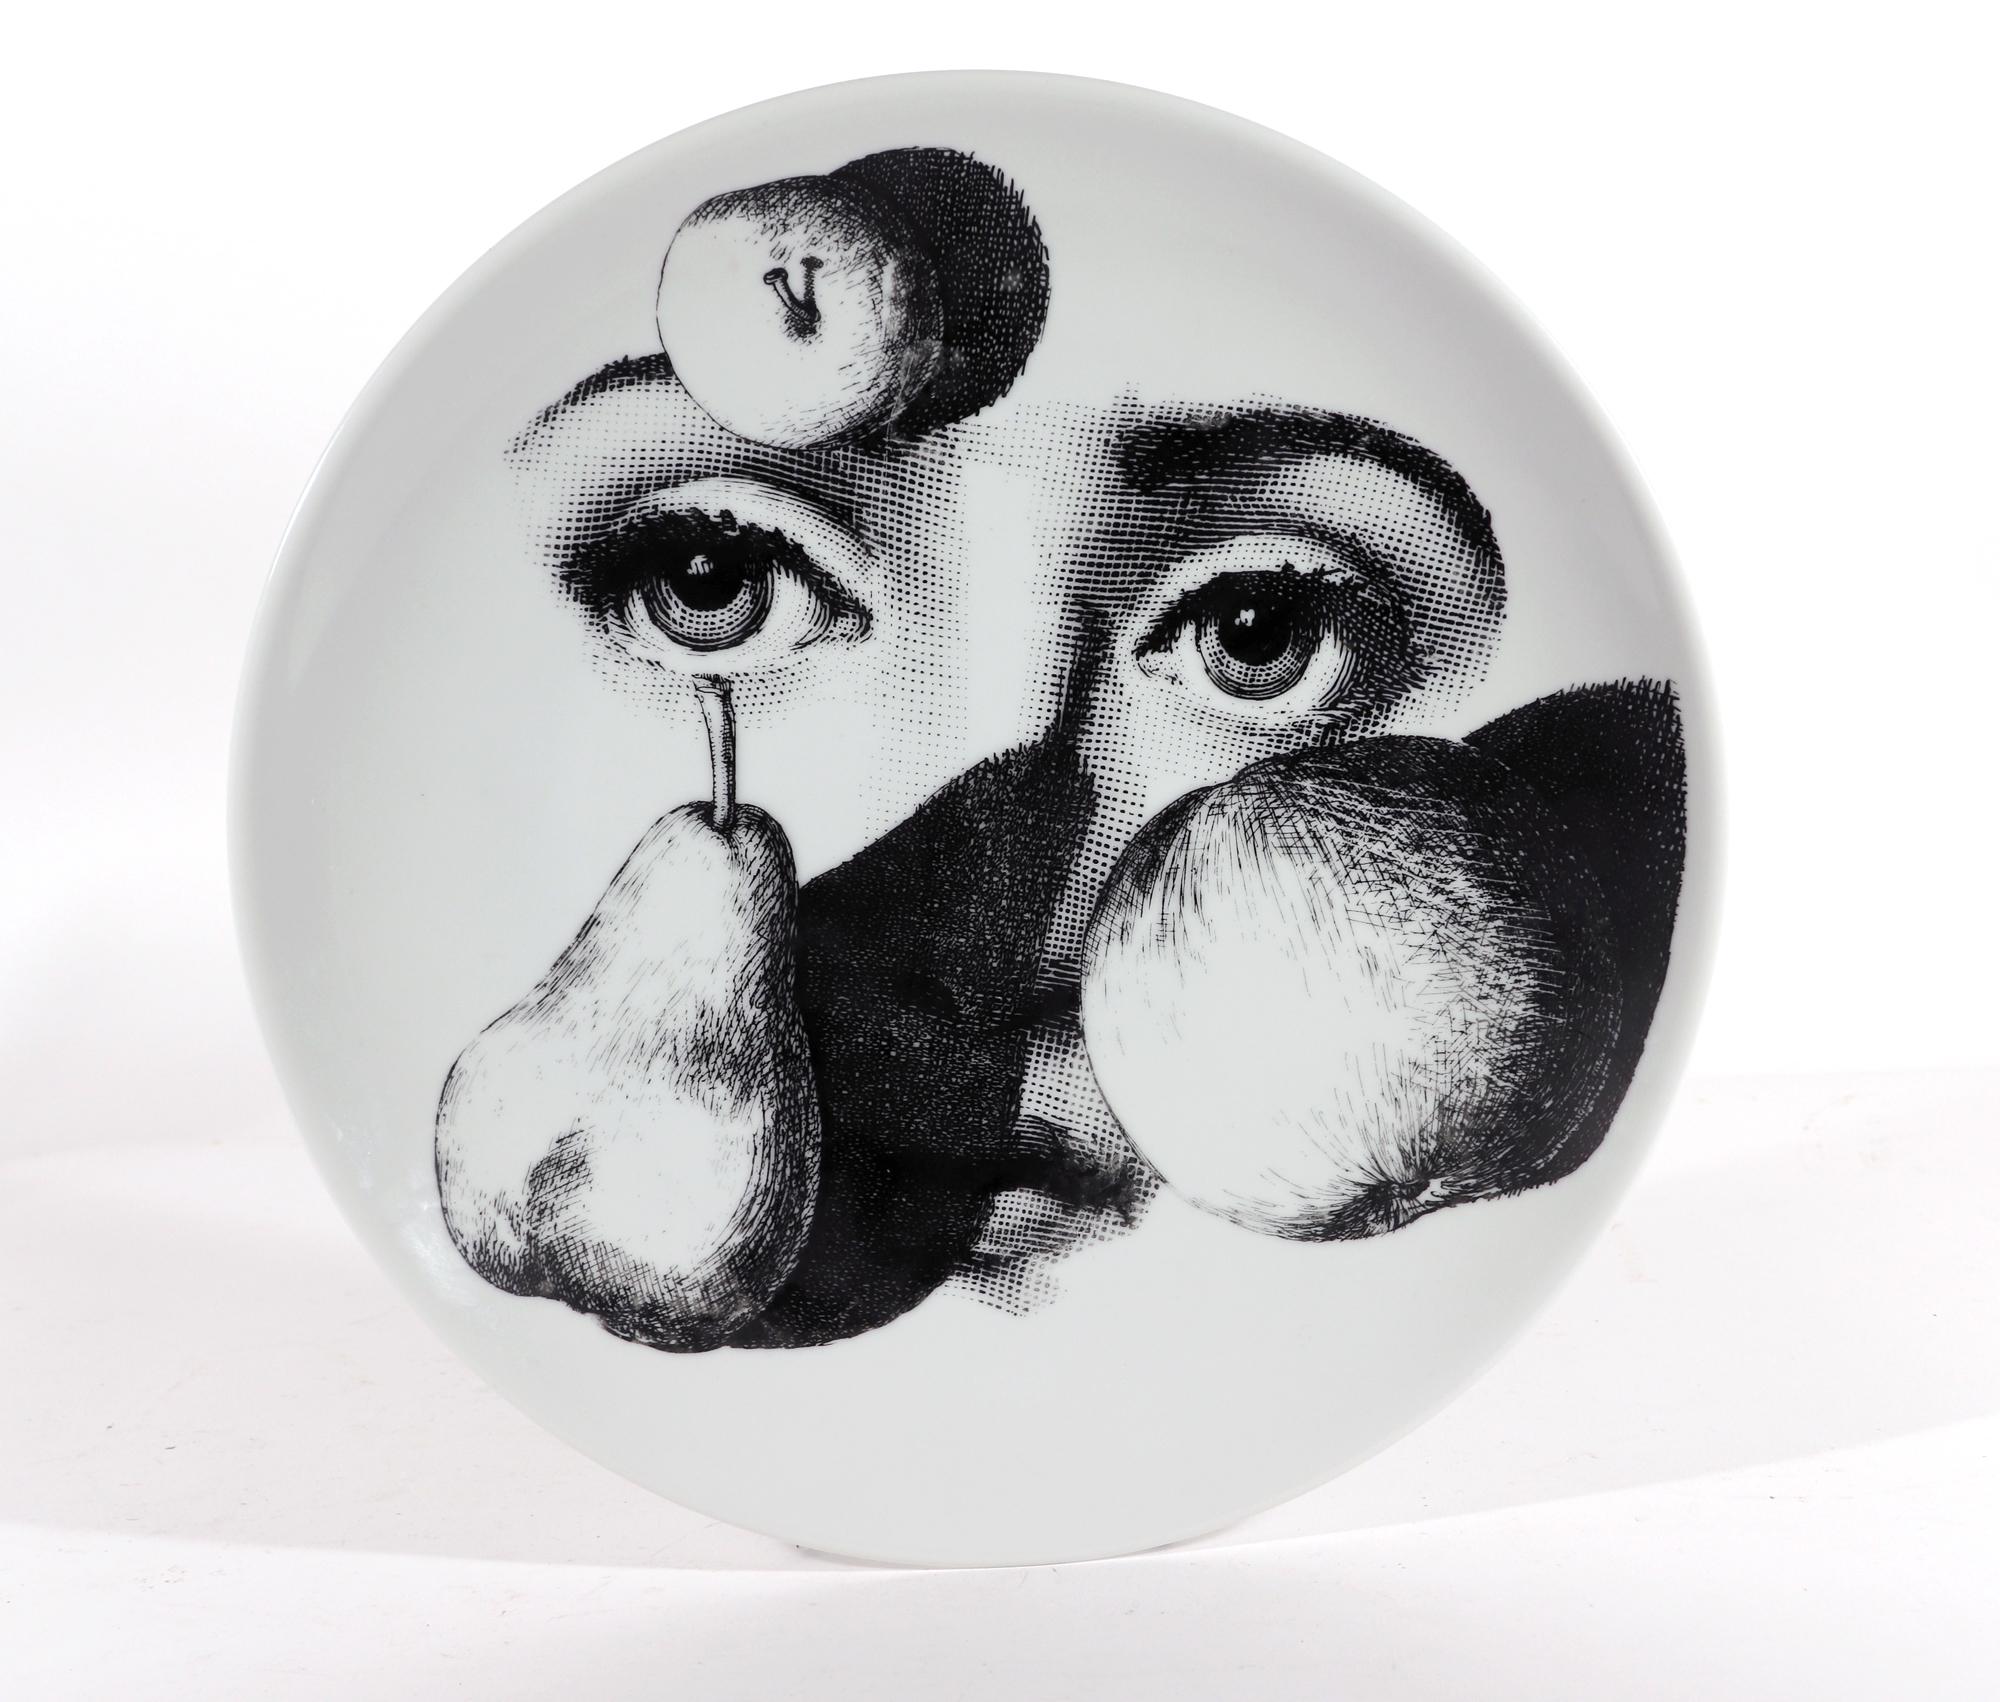 Piero Fornasetti Themes & Variations porcelain plate,
#218,

The Piero Fornasetti Porcelain plate is decorated with pattern number 218 of the Themes & Variation pattern which is a surreal take on the series with the face of Lina Caratelli with